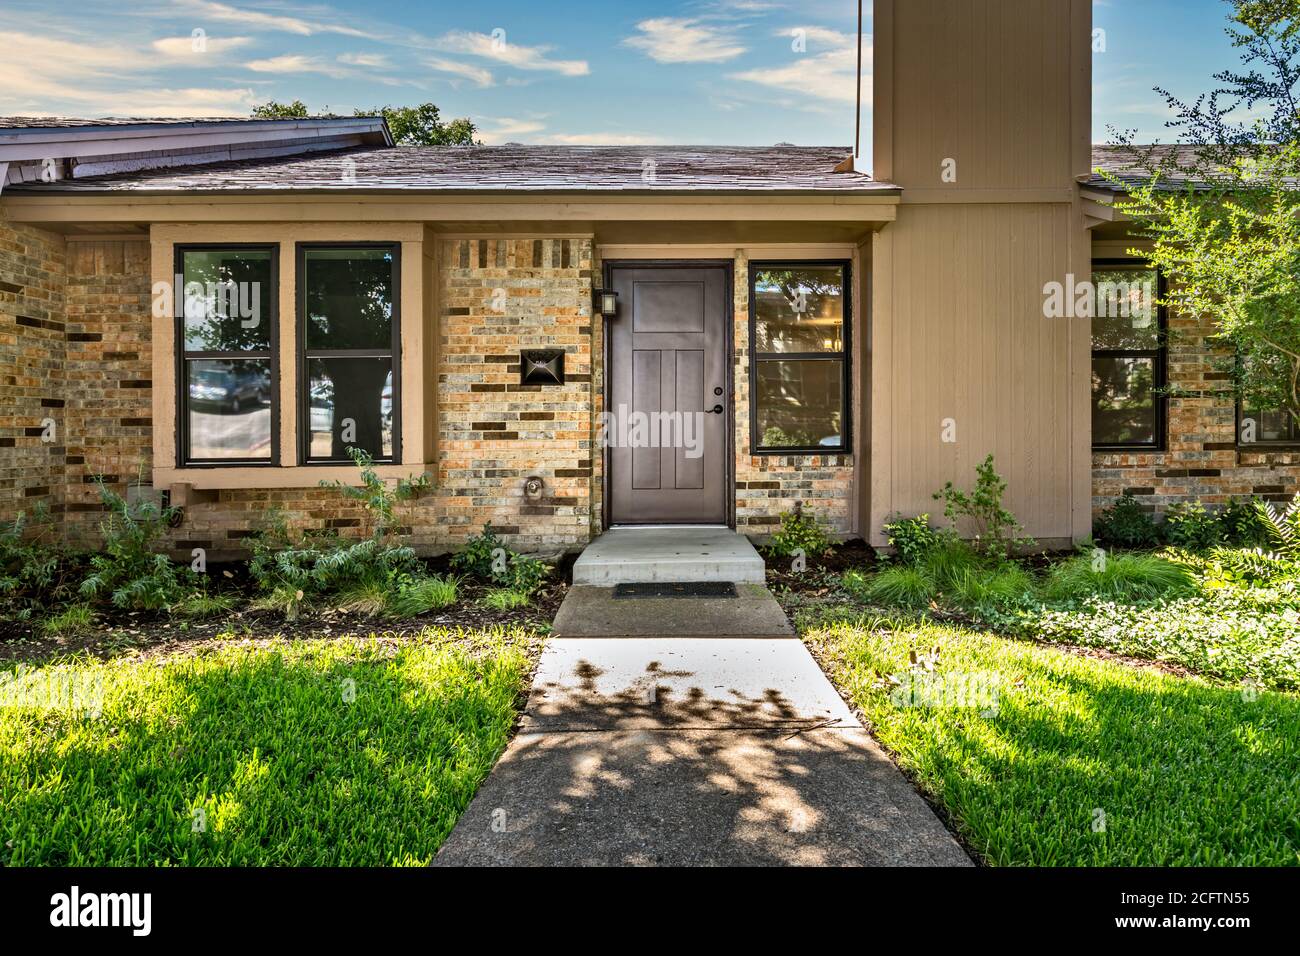 Entrance of a one story house in Dallas Texas, USA Stock Photo - Alamy